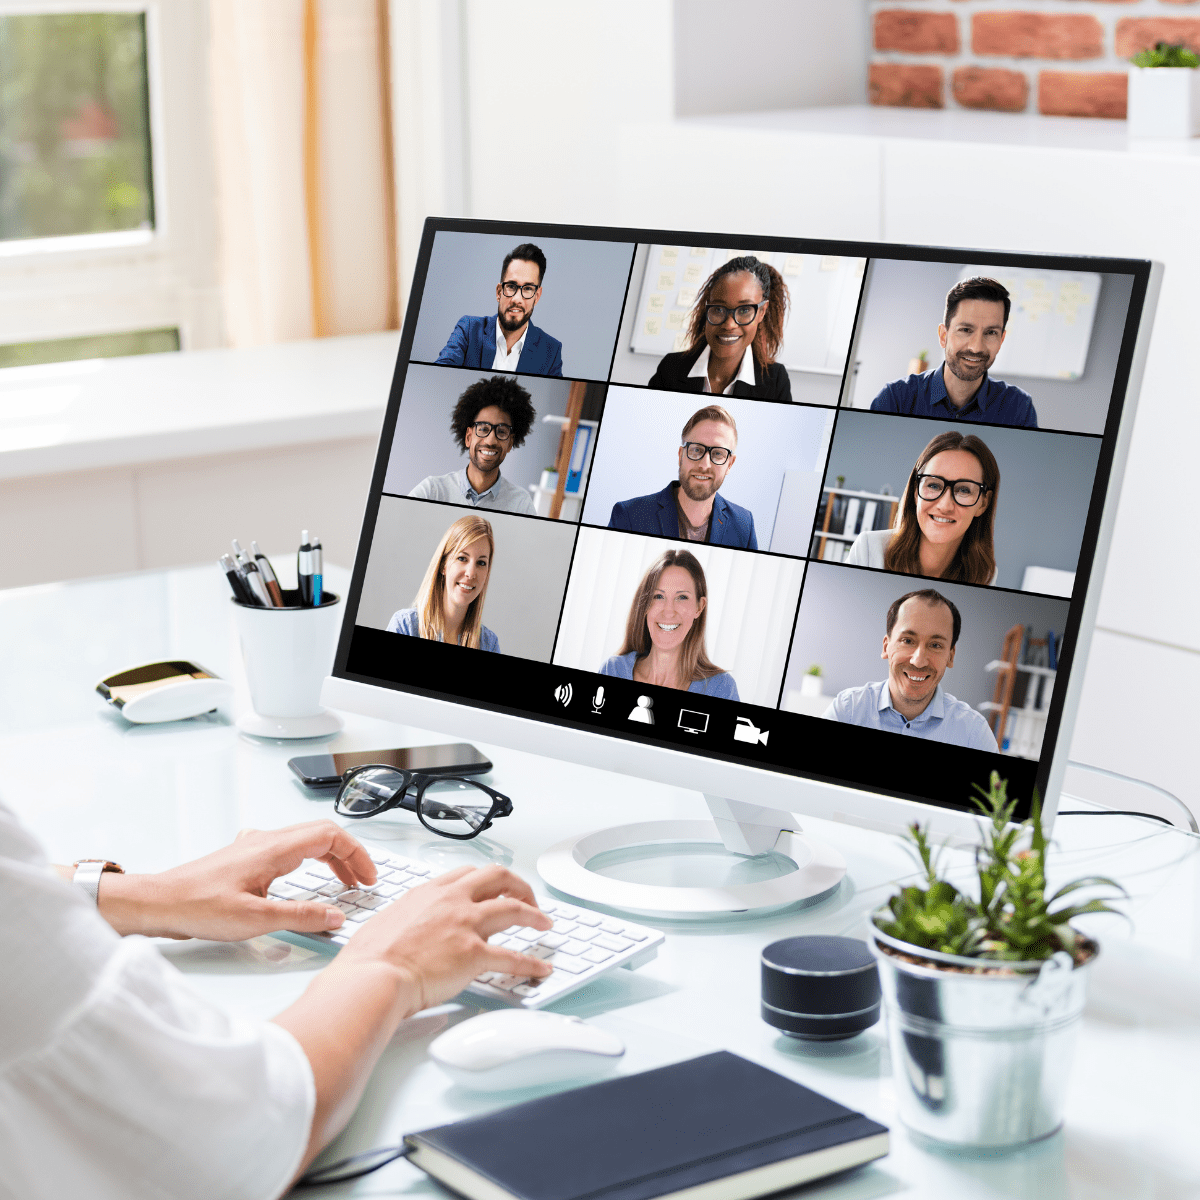 Hybrid Workspace Can Benefit From Video Conferencing - Video Conference on Desktop Computer